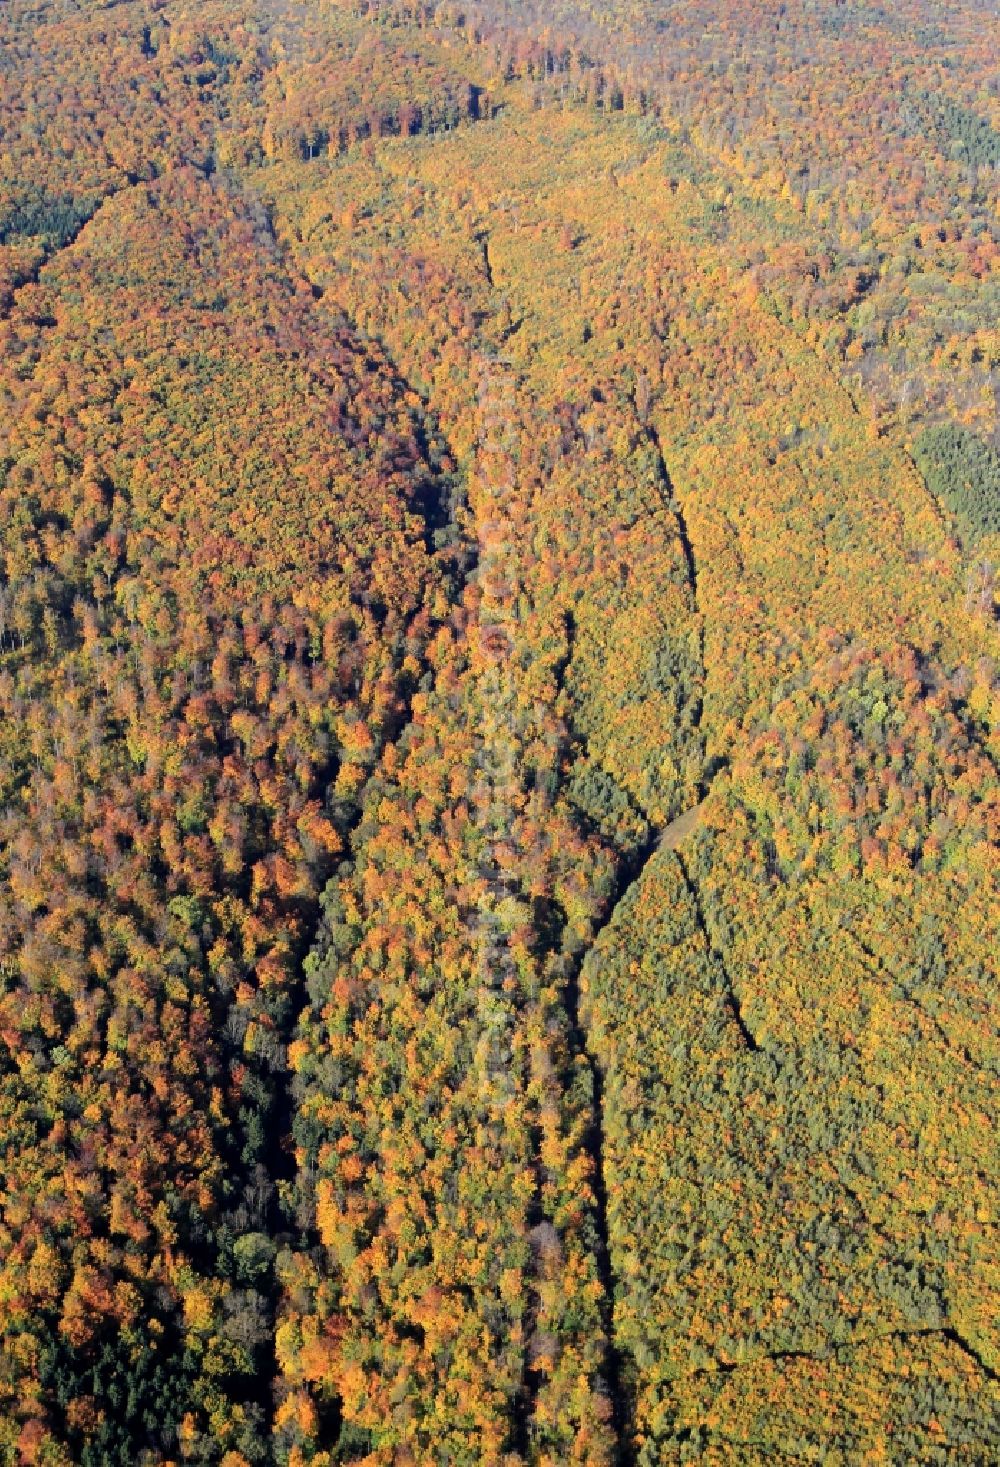 Tonndorf from above - Autumn forest landscape at Tonndorf in Thuringia